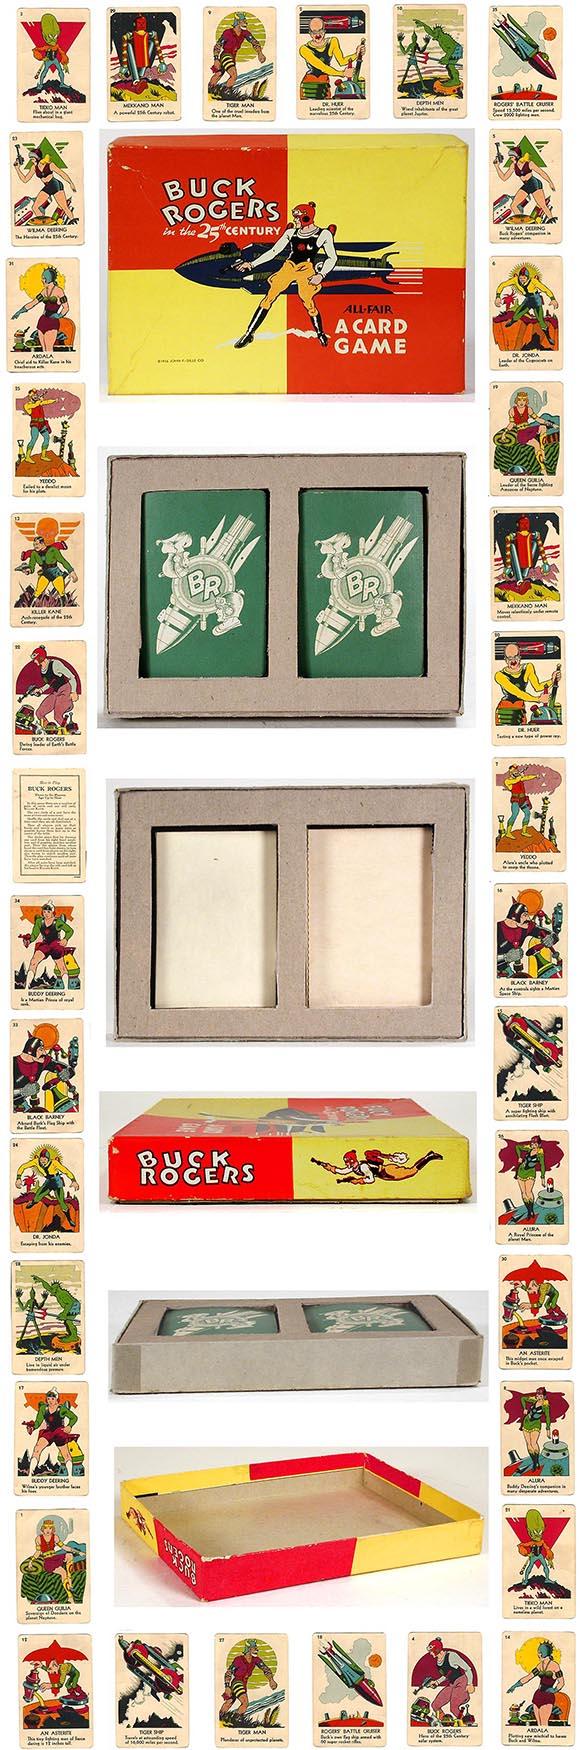 1936 Buck Rogers in The 25th Century Card Game in Original Box